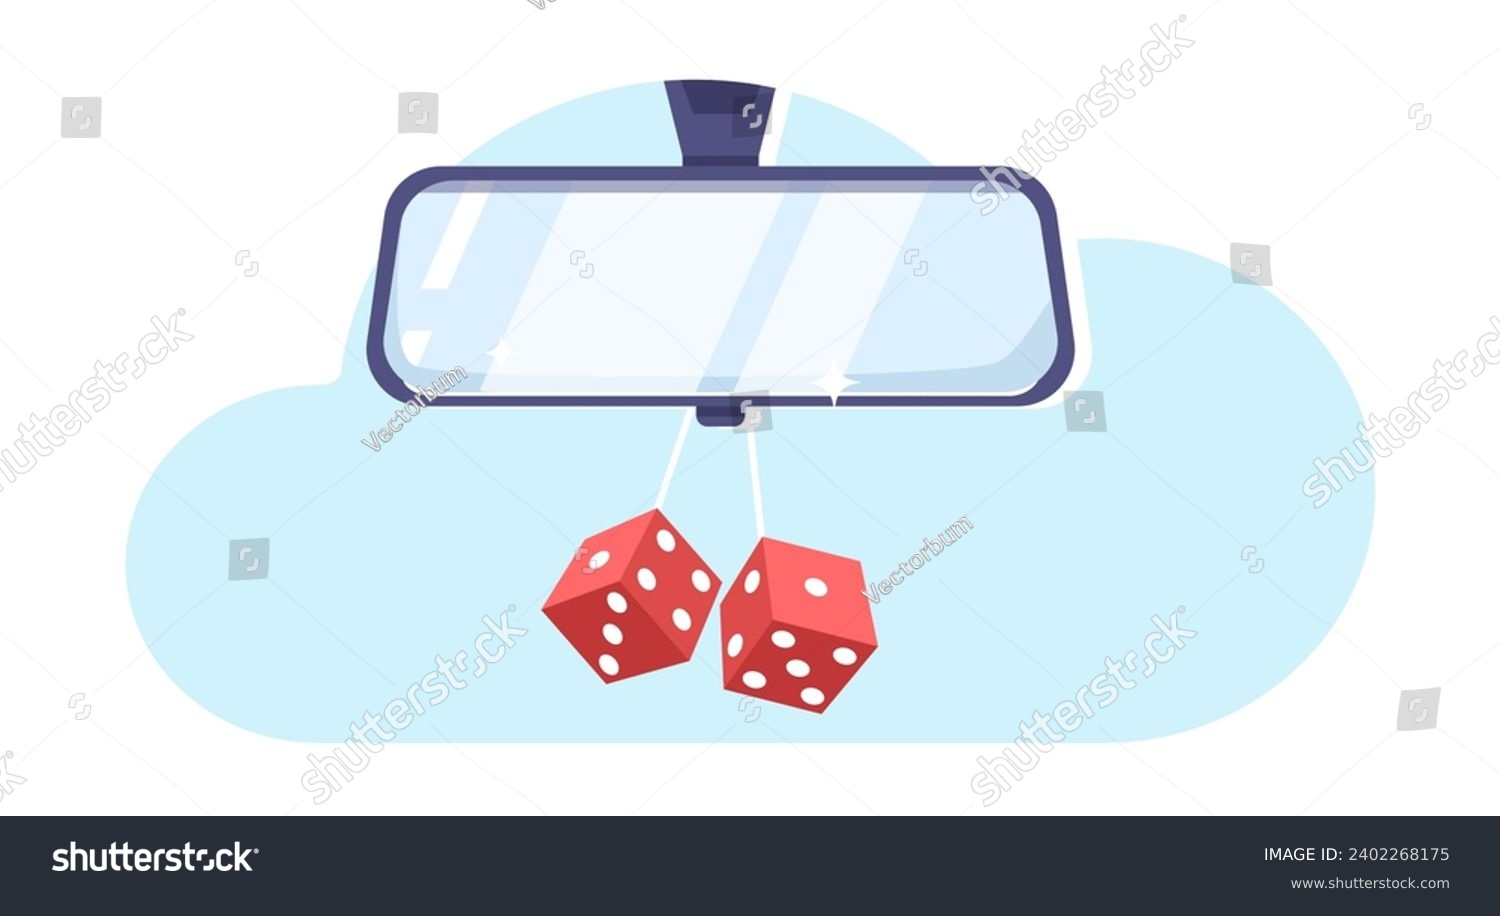 SVG of Rearview mirror with dangling cubes. Automobile behind reflection. Auto transportation. Drive visibility. Road reflect. Glass frame for vehicle back control. Handing svg